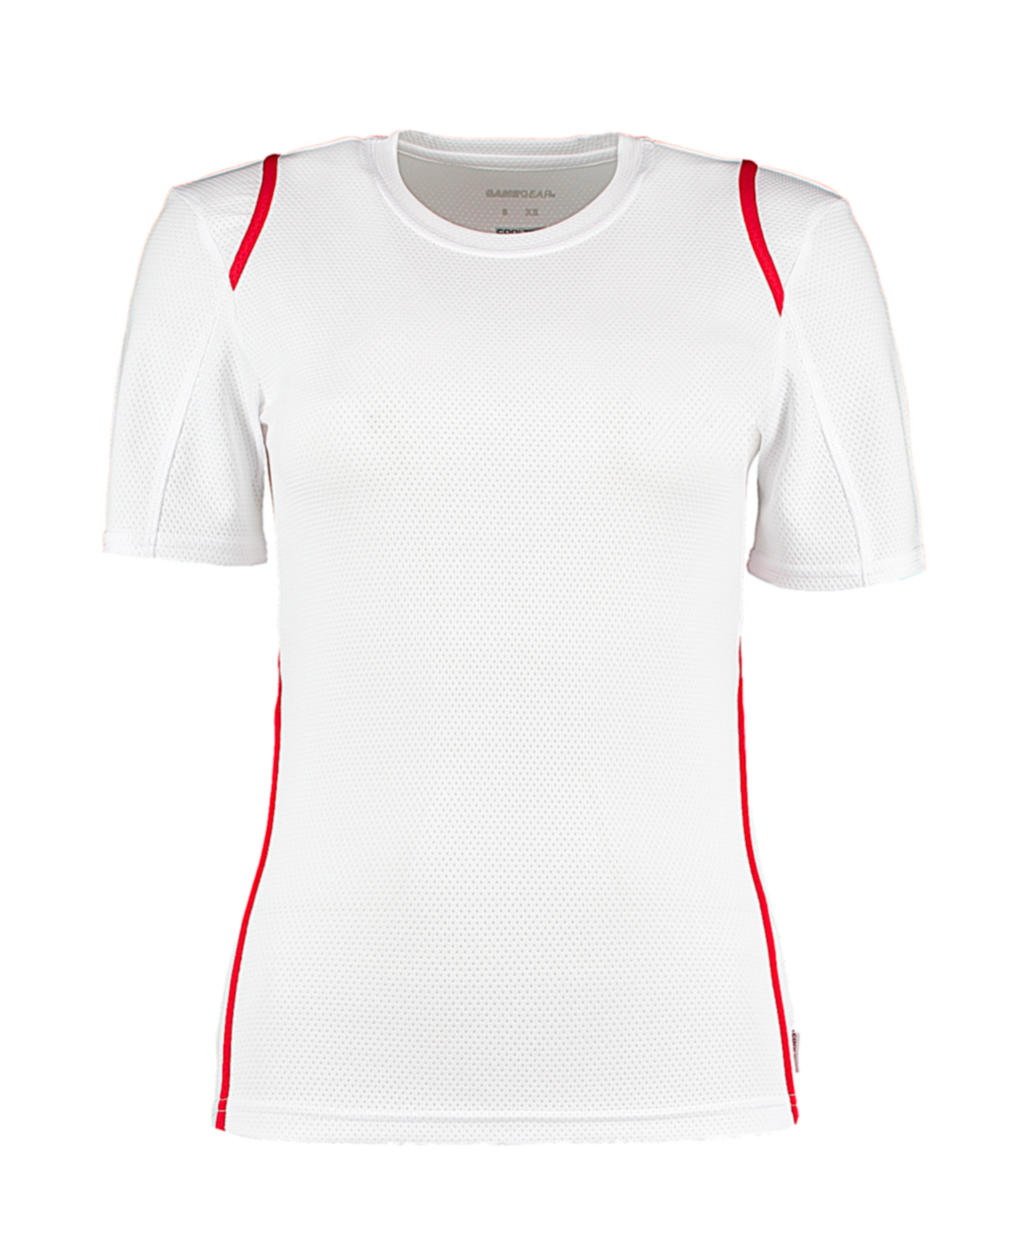  Womens Regular Fit Cooltex? Contrast Tee in Farbe White/Red